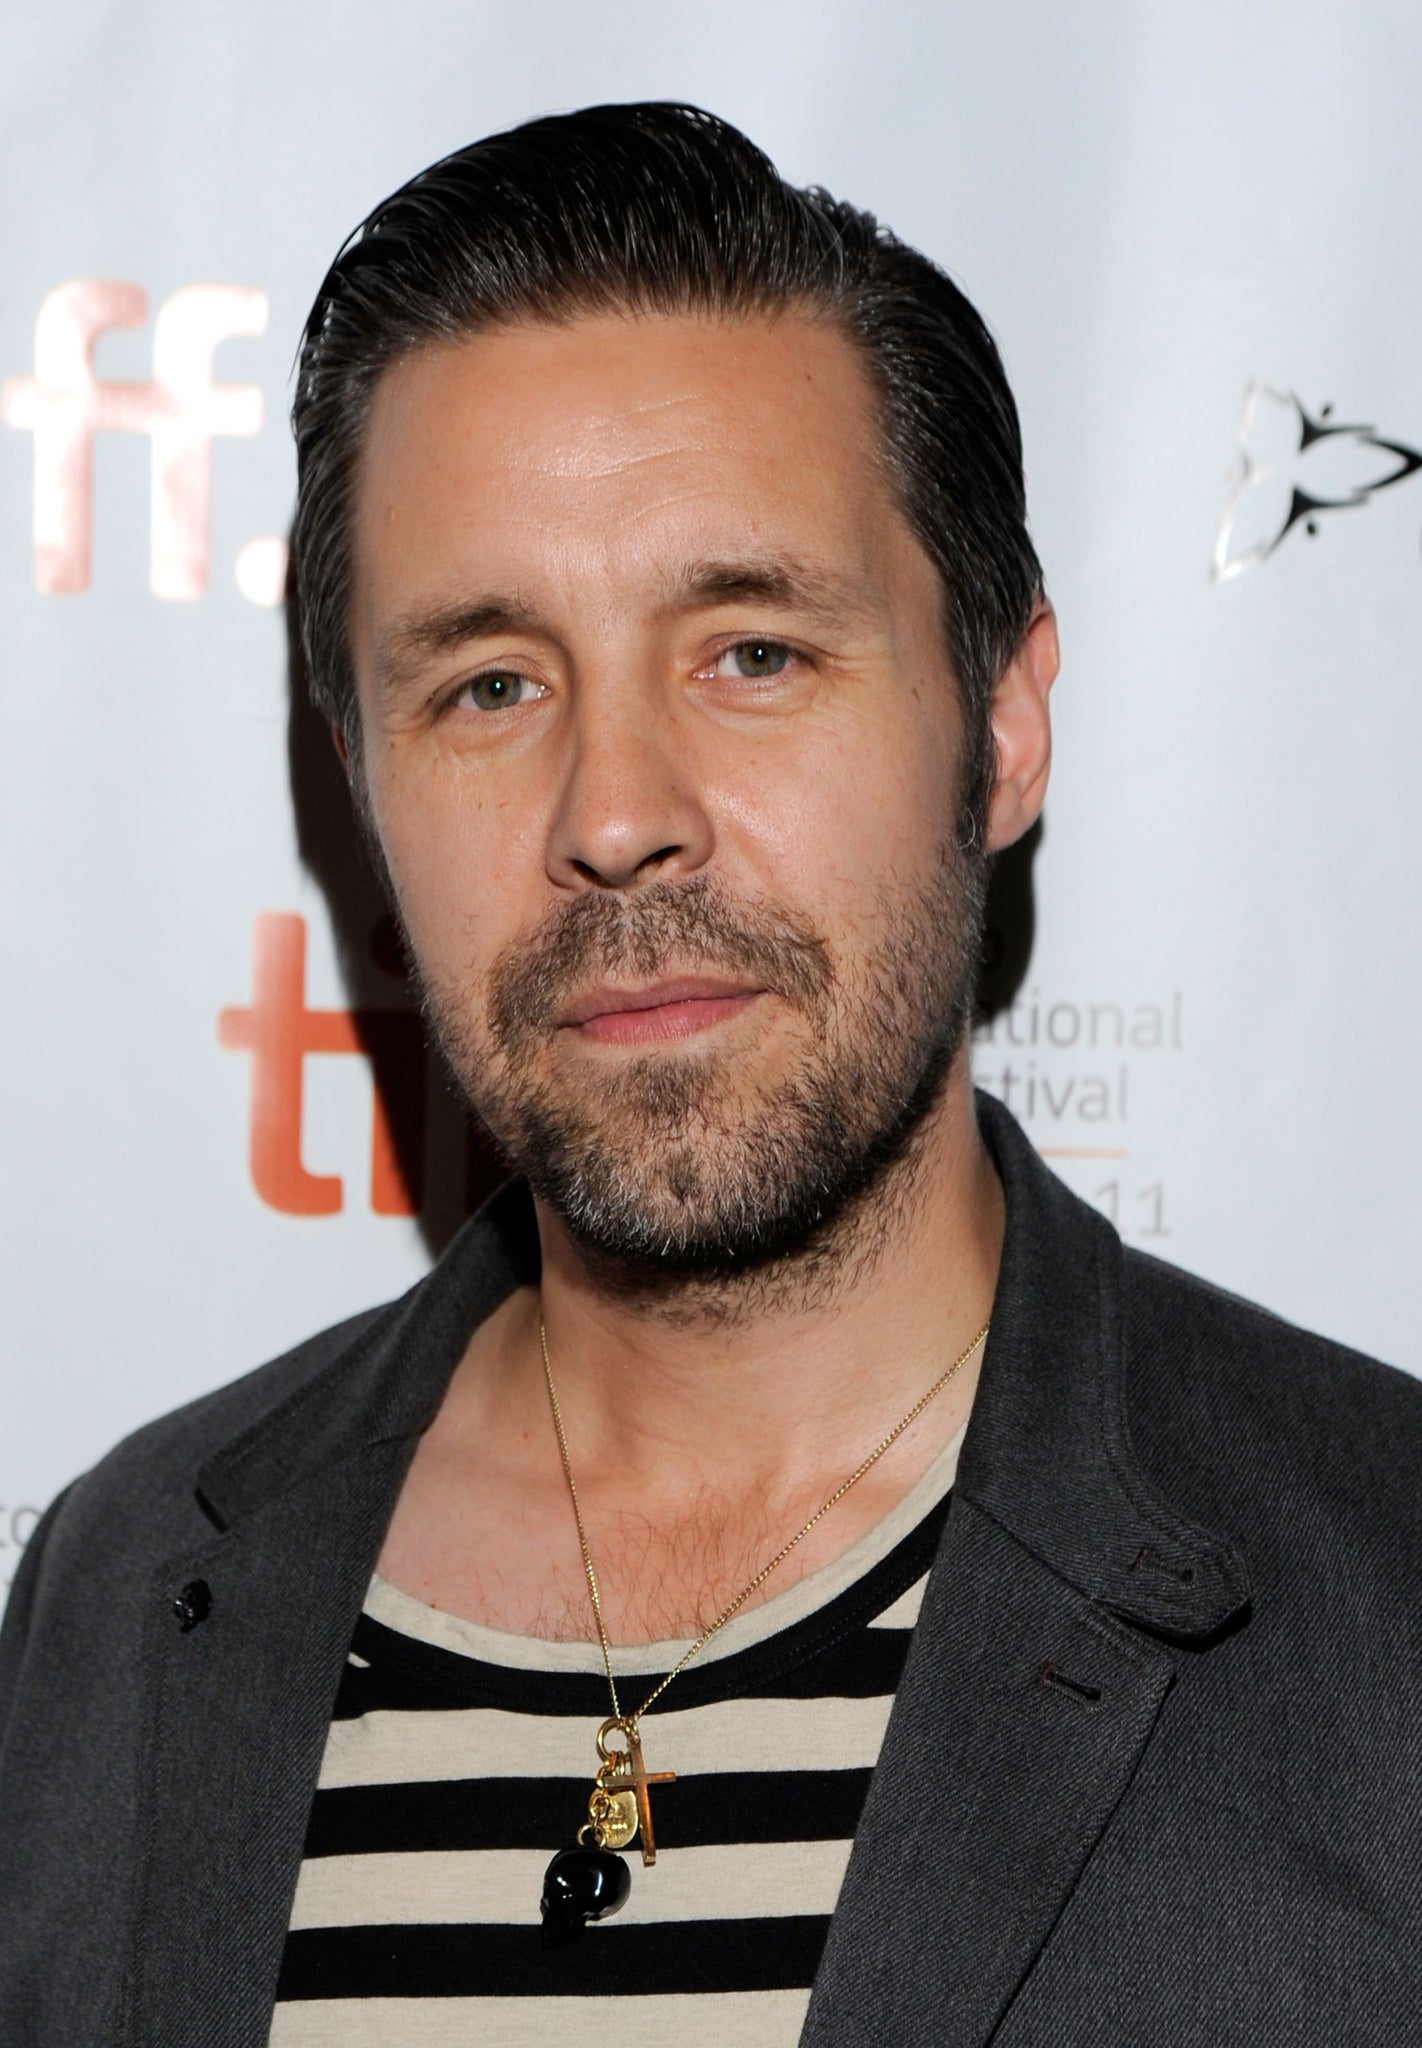 Actor Paddy Considine has been diagnosed with a rare condition that makes him sensitive to light